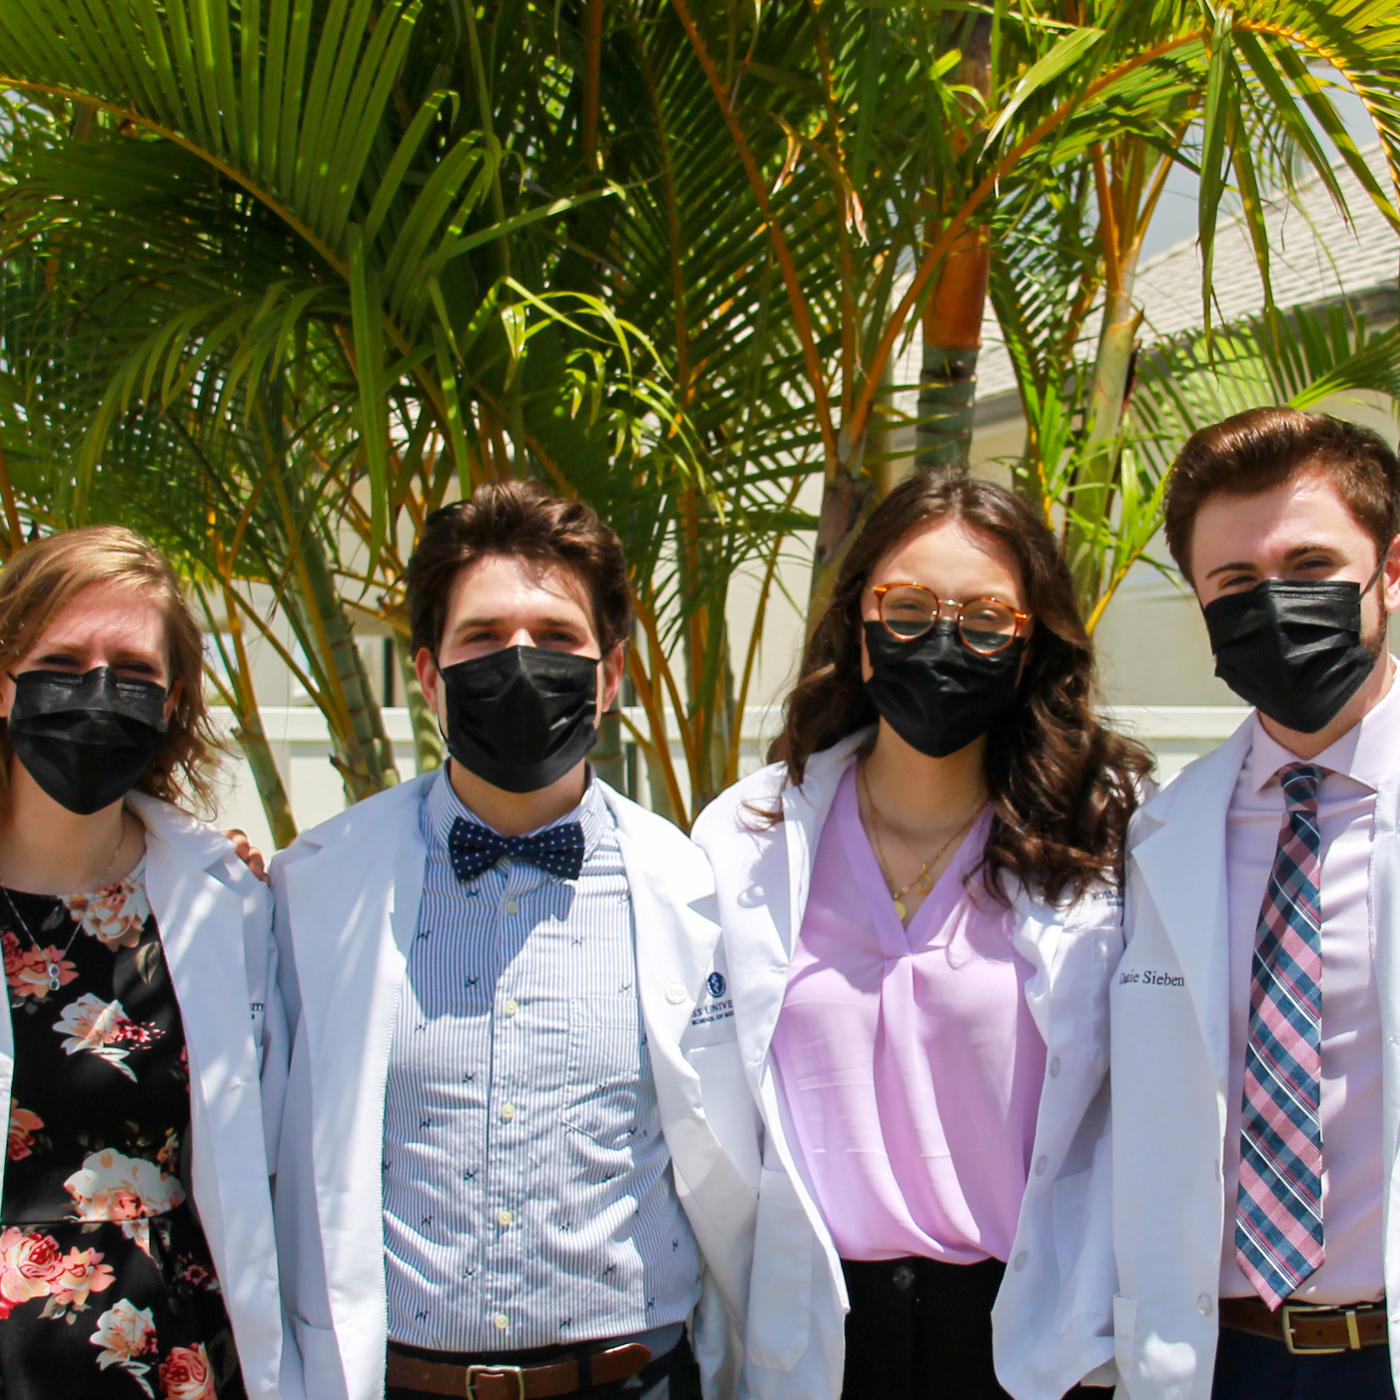 group photo of students in Barbados wearing white coats and face masks